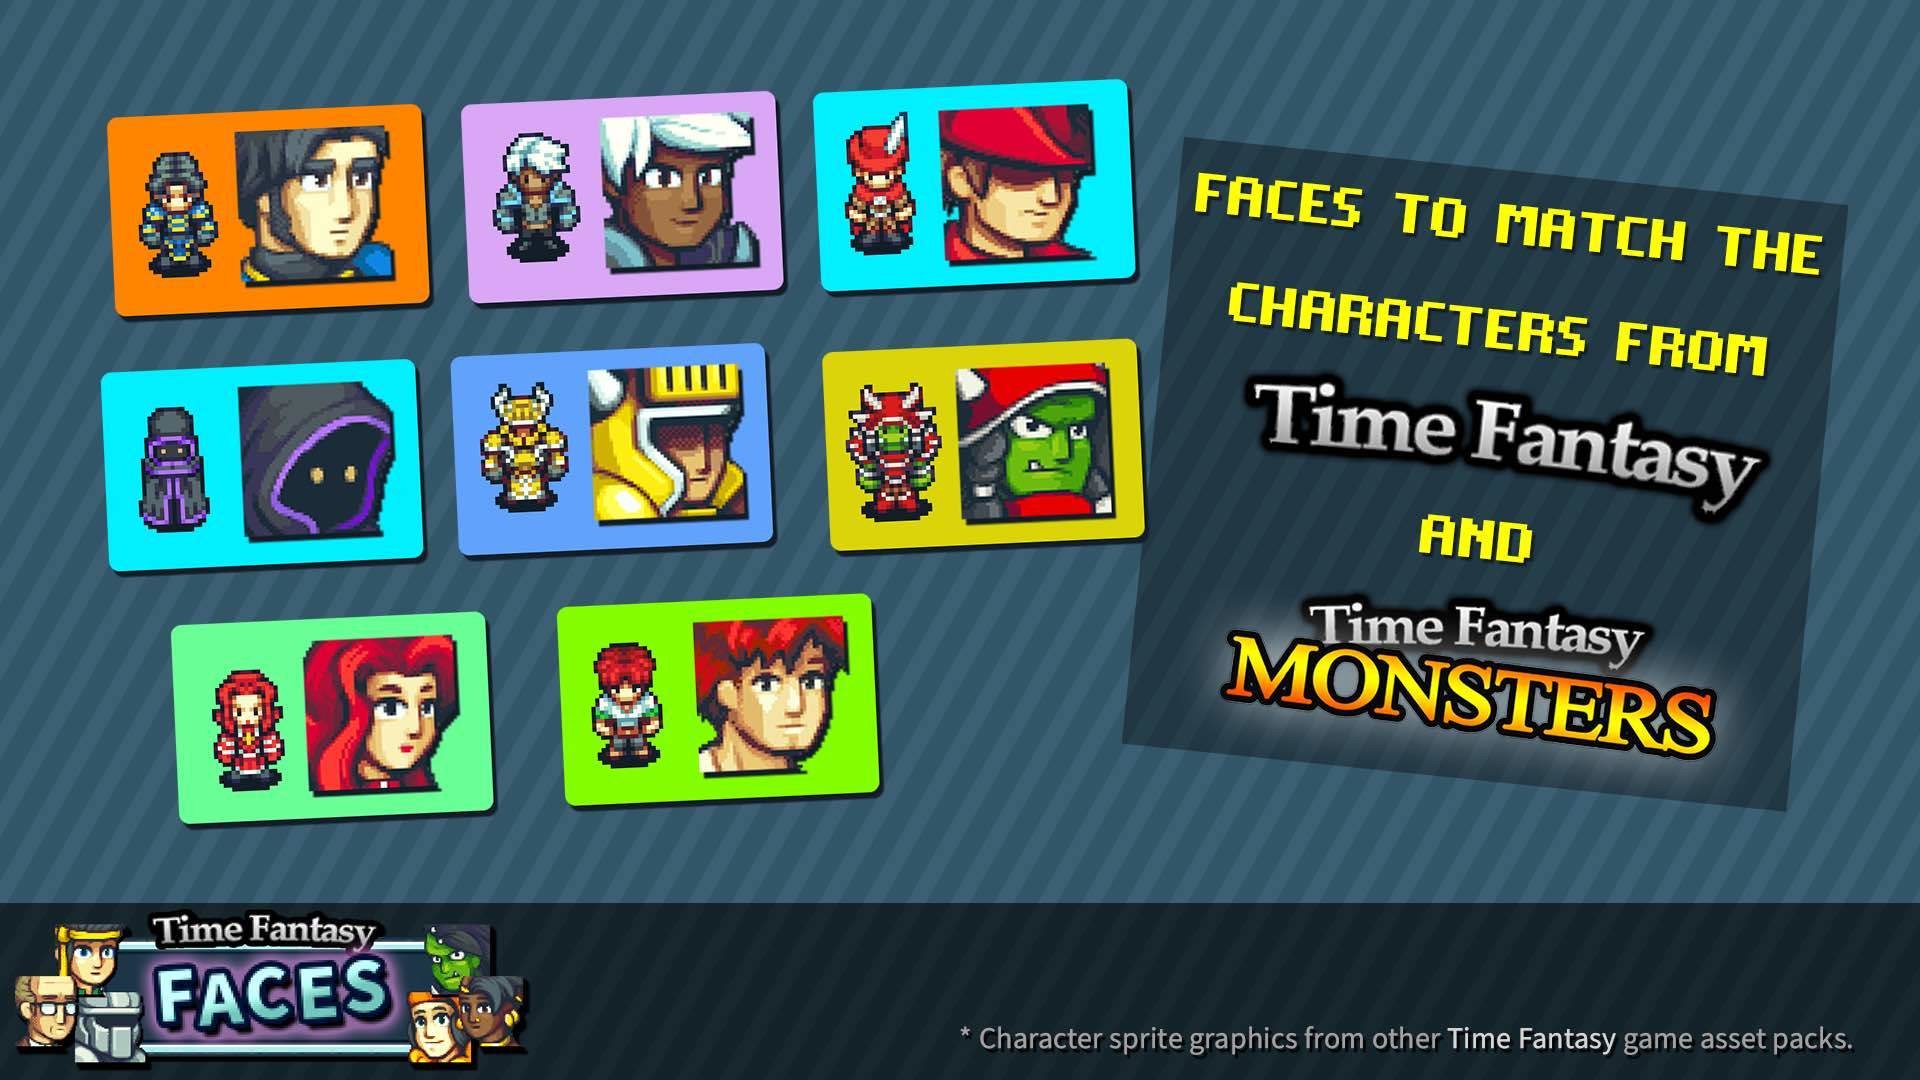 RPG Maker MZ - Time Fantasy Faces Featured Screenshot #1